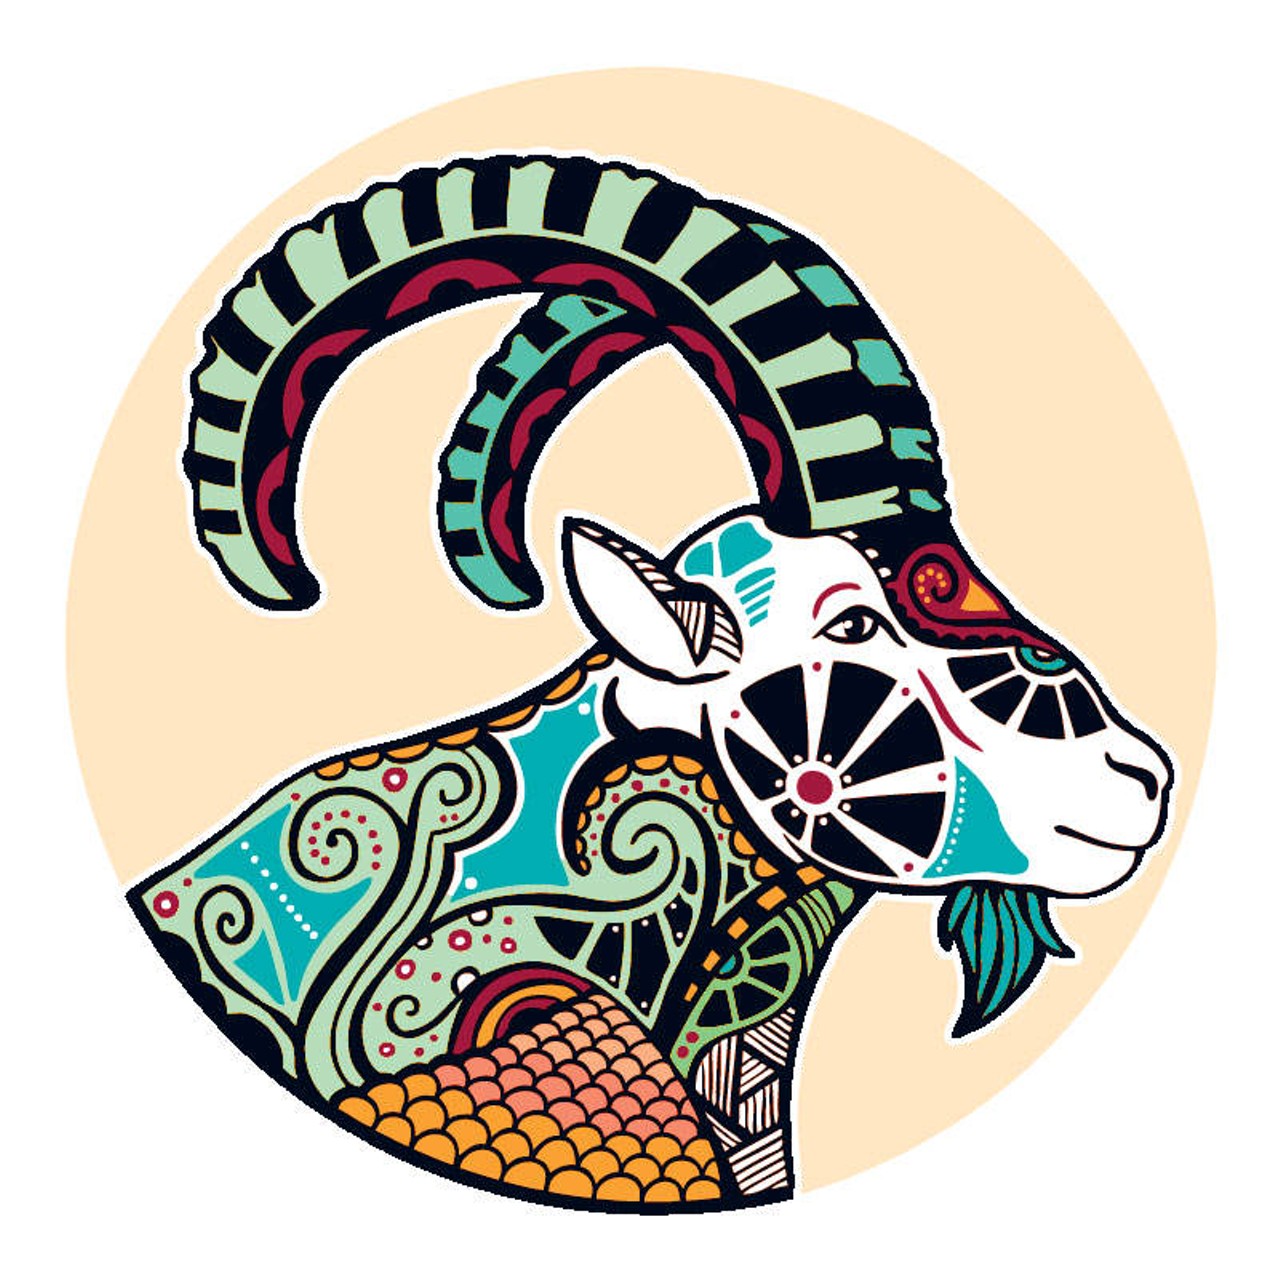 CAPRICORN (Dec. 21-Jan. 20): 
Finally! After all this you are beginning to get the picture. For the last (X) number of years you&#146;ve knocked yourself out trying to make things work. You&#146;ve gotten so good at it you deserve a raise, or a promotion, or some level of recognition for all of this effort. If you&#146;ve had it up to here, just about anything could be happening. Half of you have already left, and half of you have yet to make up your mind. Give things two more weeks to get clear. If you&#146;re still present and accounted for, thank your lucky stars that the deeper part of your nature is equipped to handle anything.